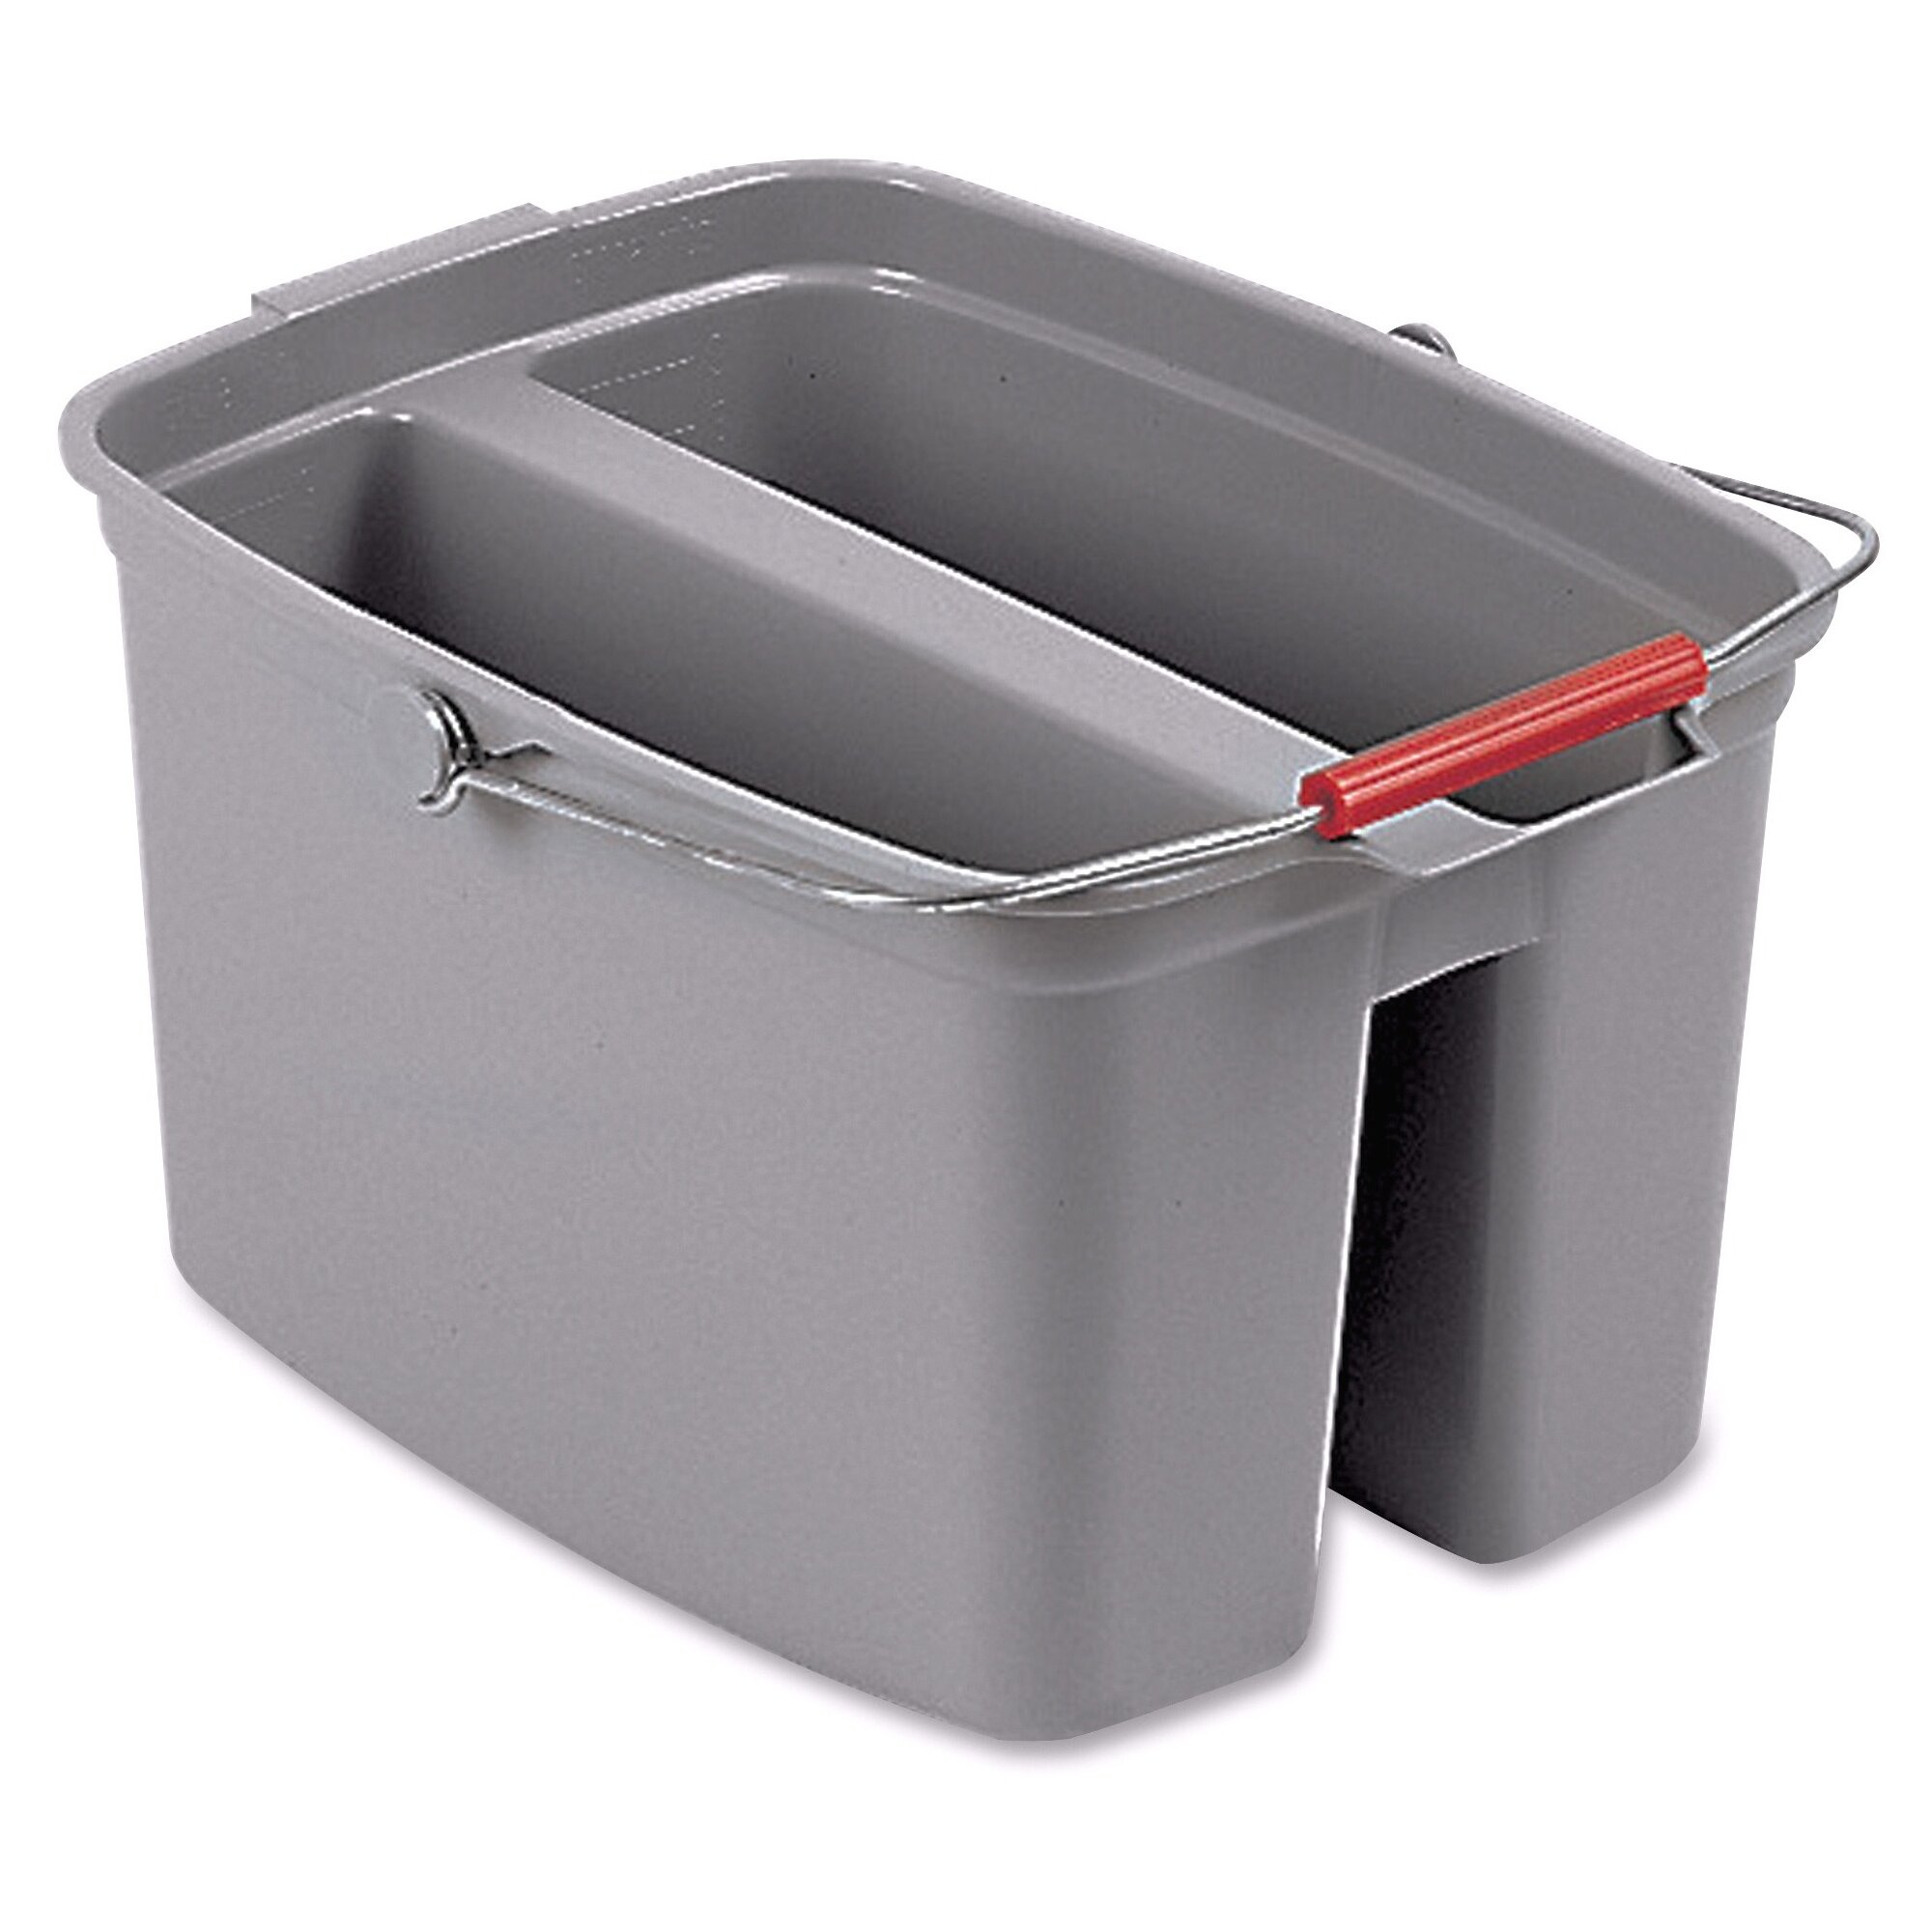 Rubbermaid Commercial Products launches new floor mops, bucket